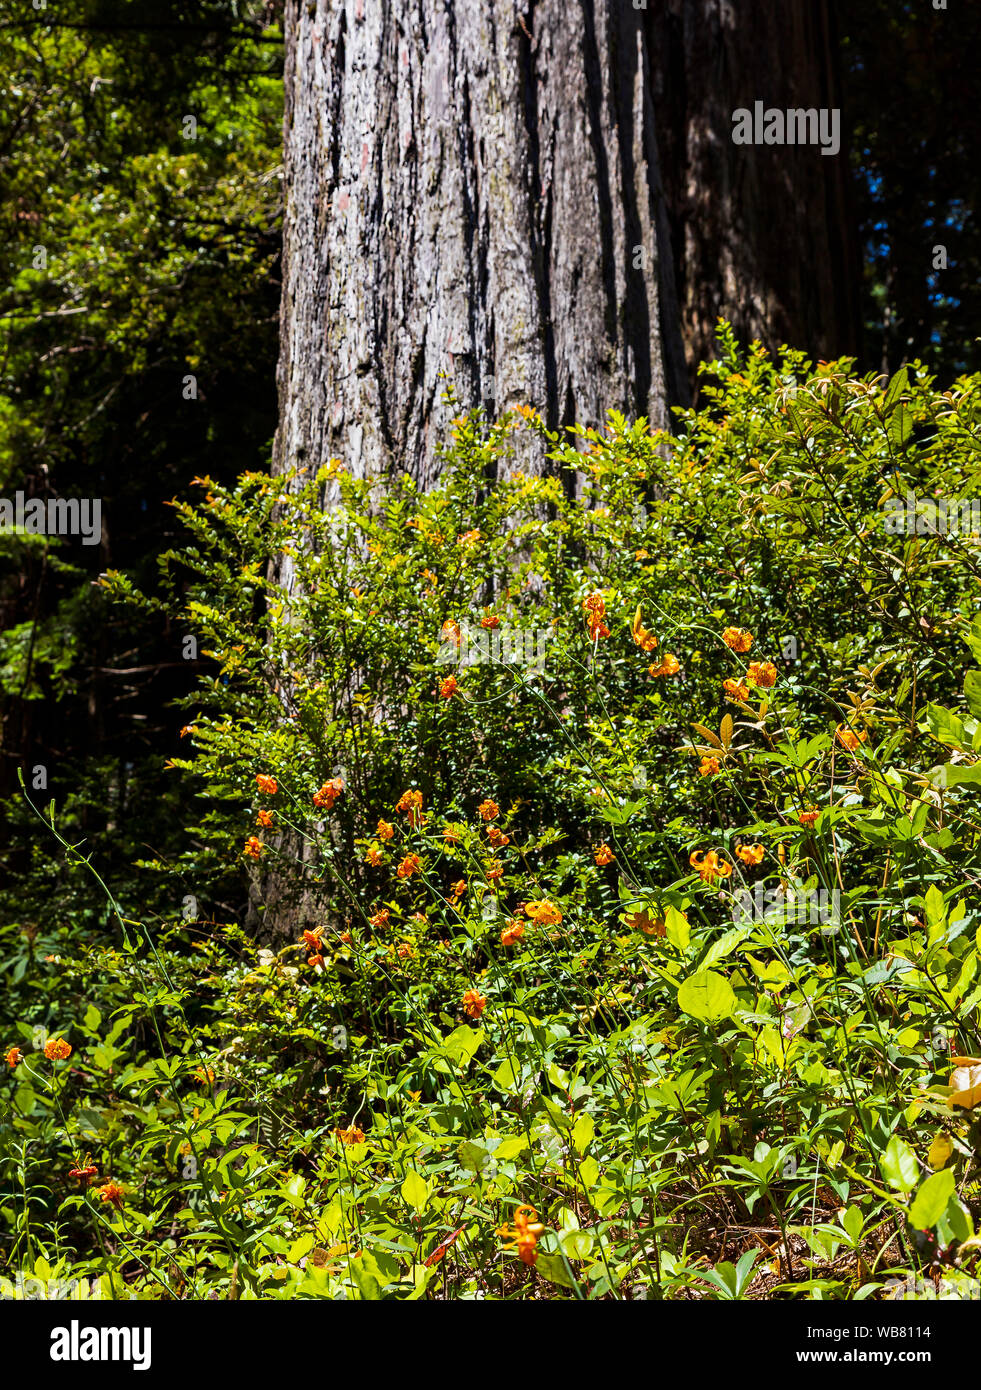 A display of a delicate wildflower known as Leopard Lily ( Lilium pardalinum) at the base of a stately Coast Redwood Tree  (Sequoia sempervirens). Stock Photo